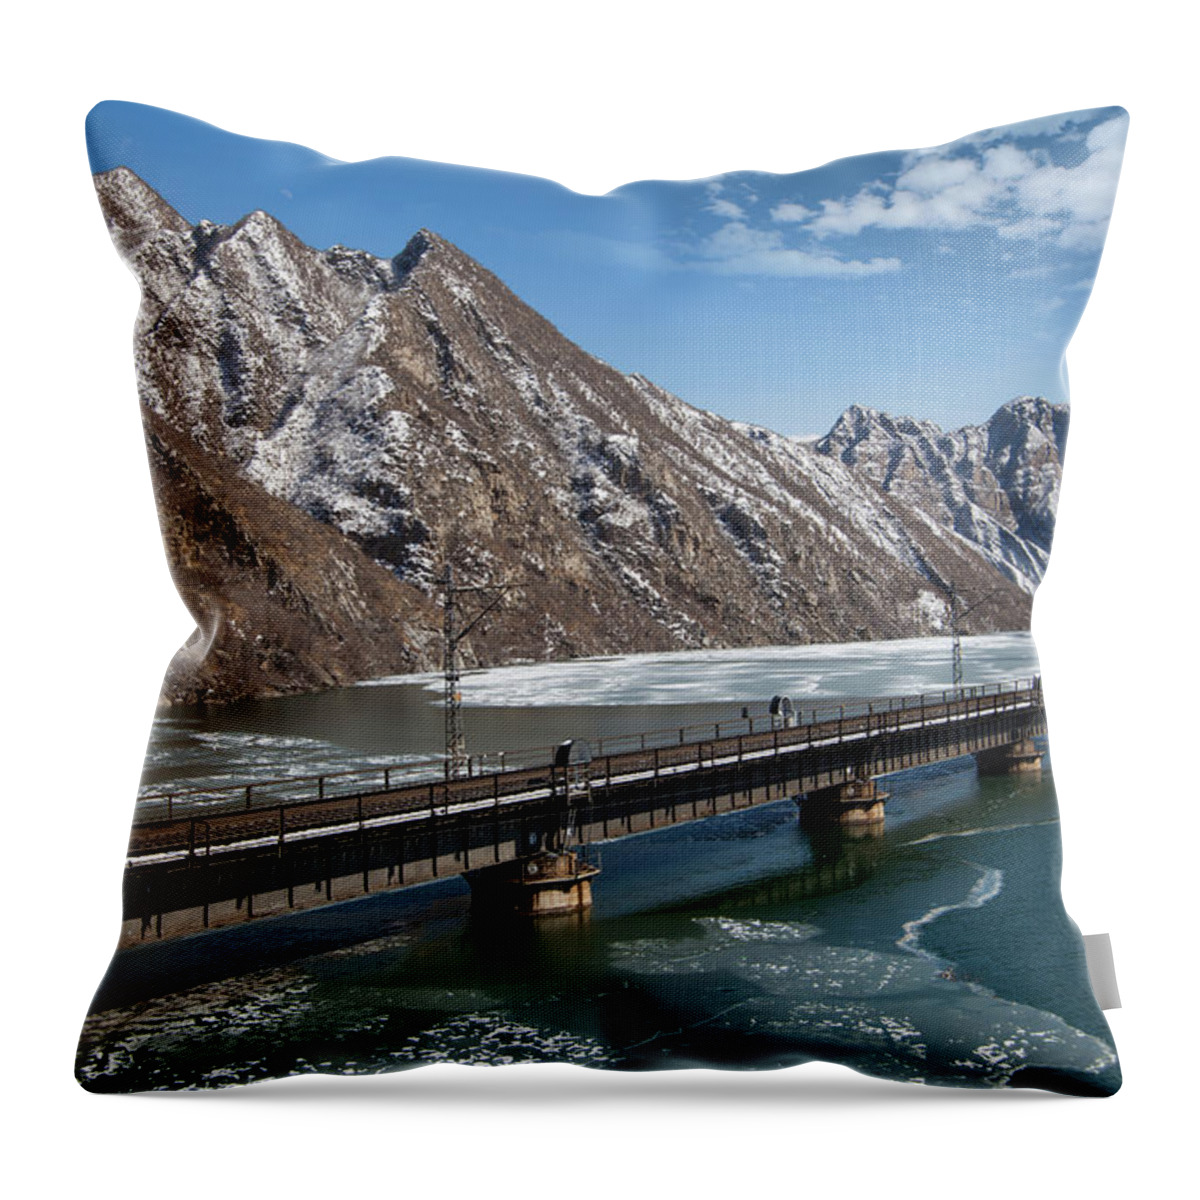 Scenics Throw Pillow featuring the photograph Railway #1 by Czqs2000 / Sts